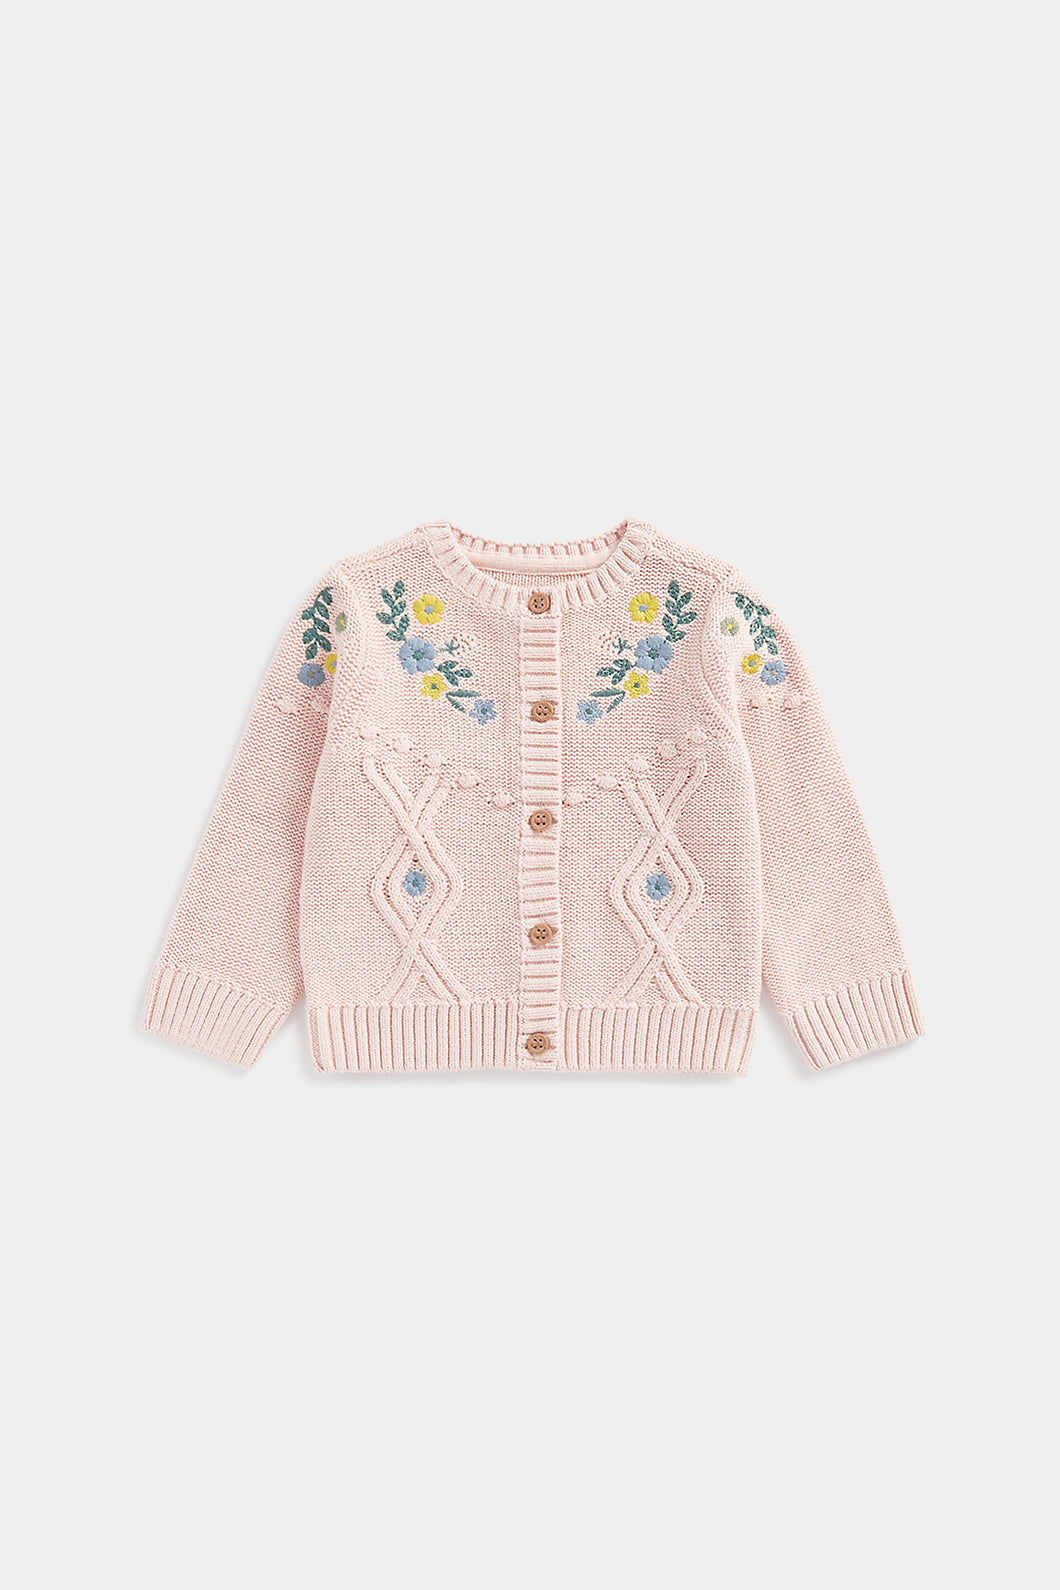 Mothercare Enchanted Garden Knitted Cardigan